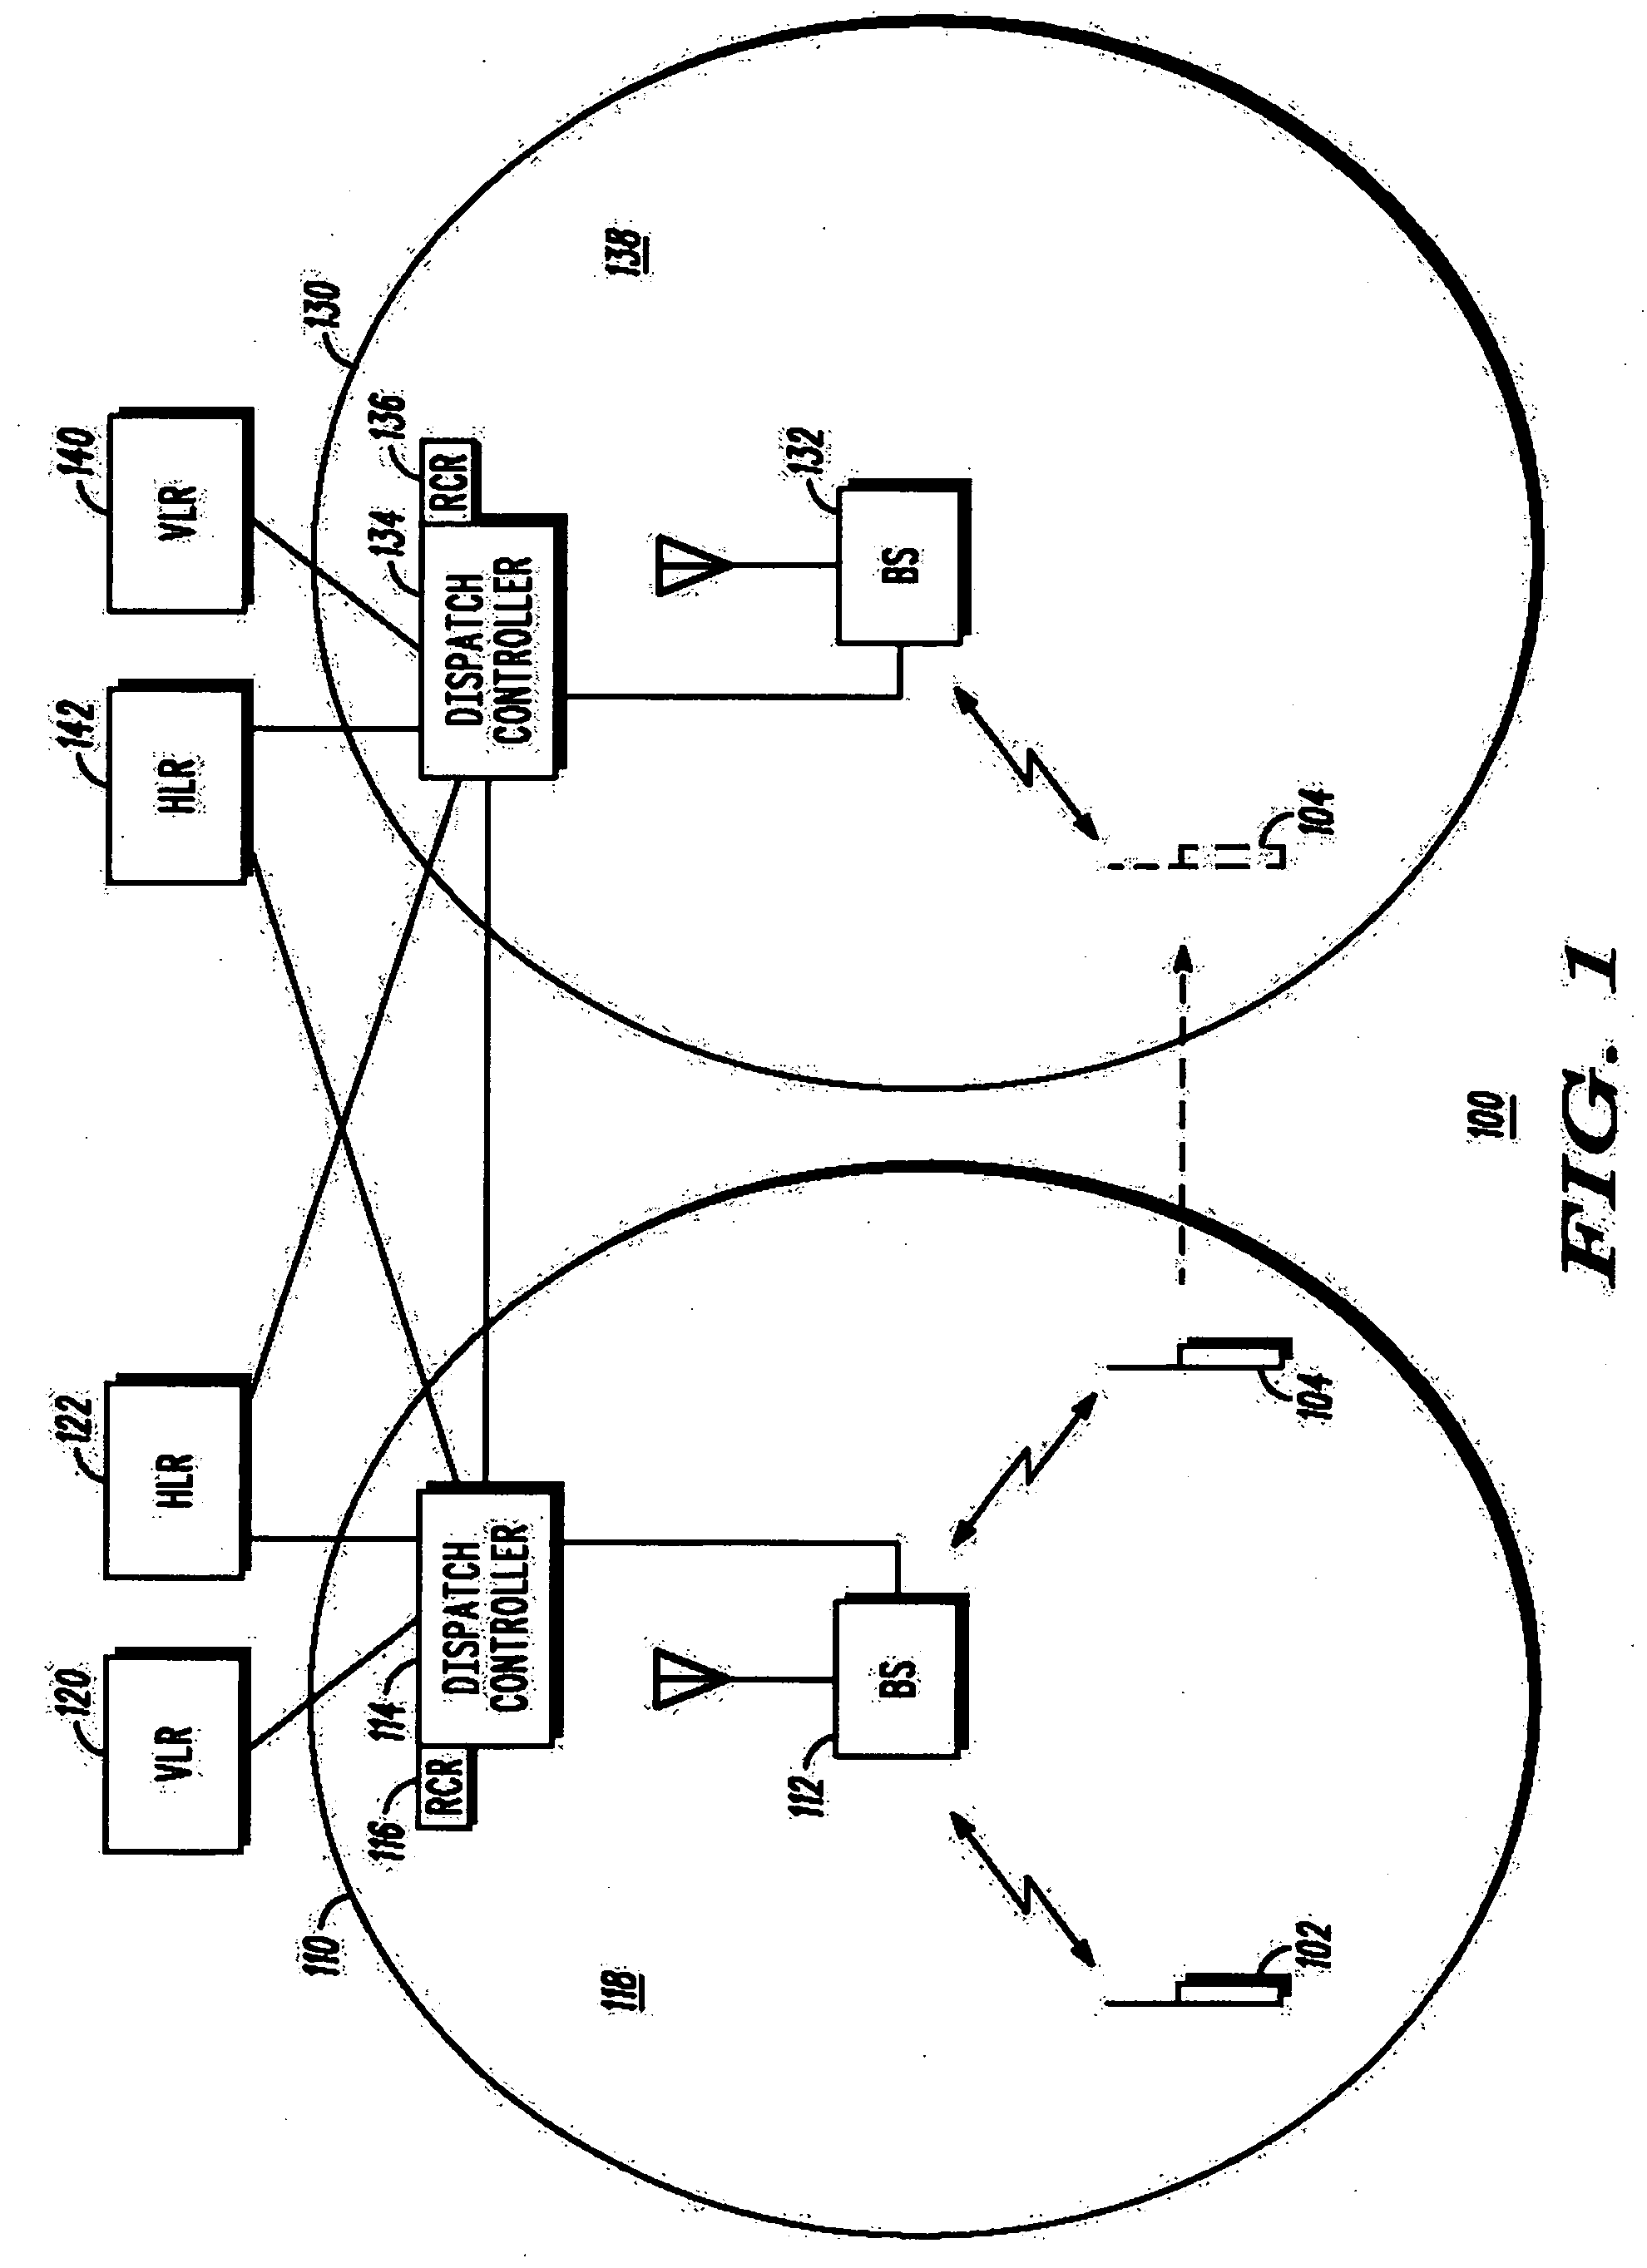 Method and apparatus for setting up a dispatch/push-to-talk call